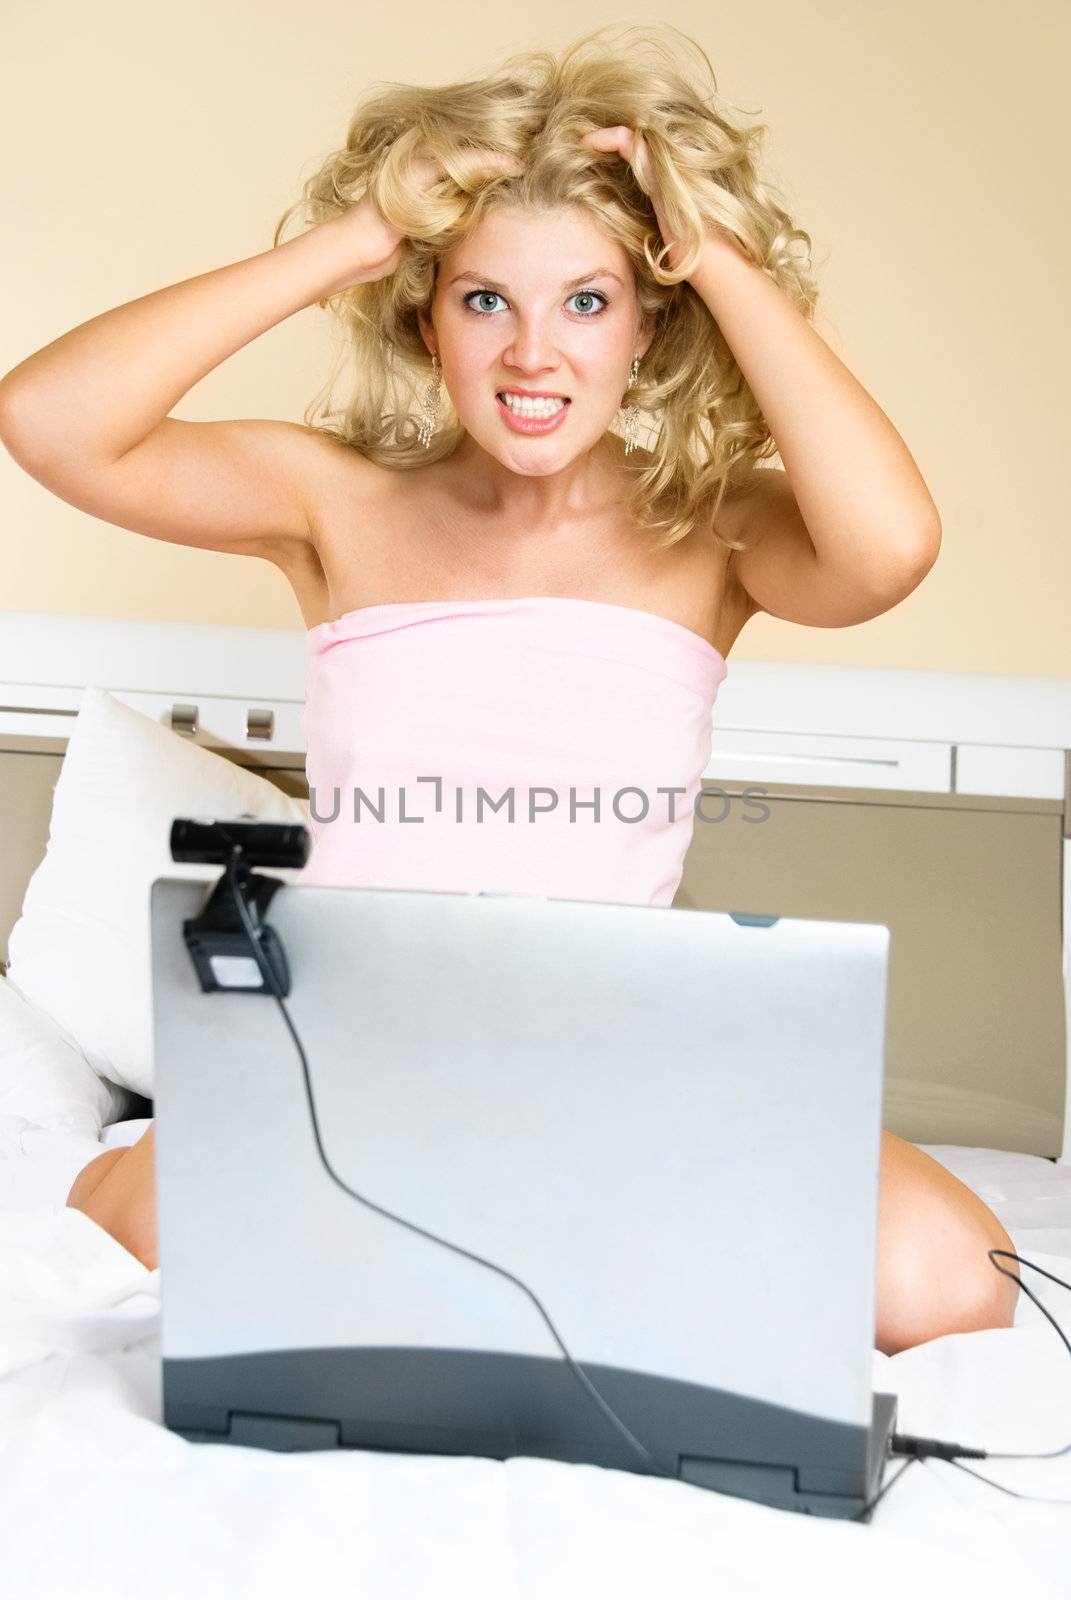 shocked girl at home communicating through the Internet using a web camera 